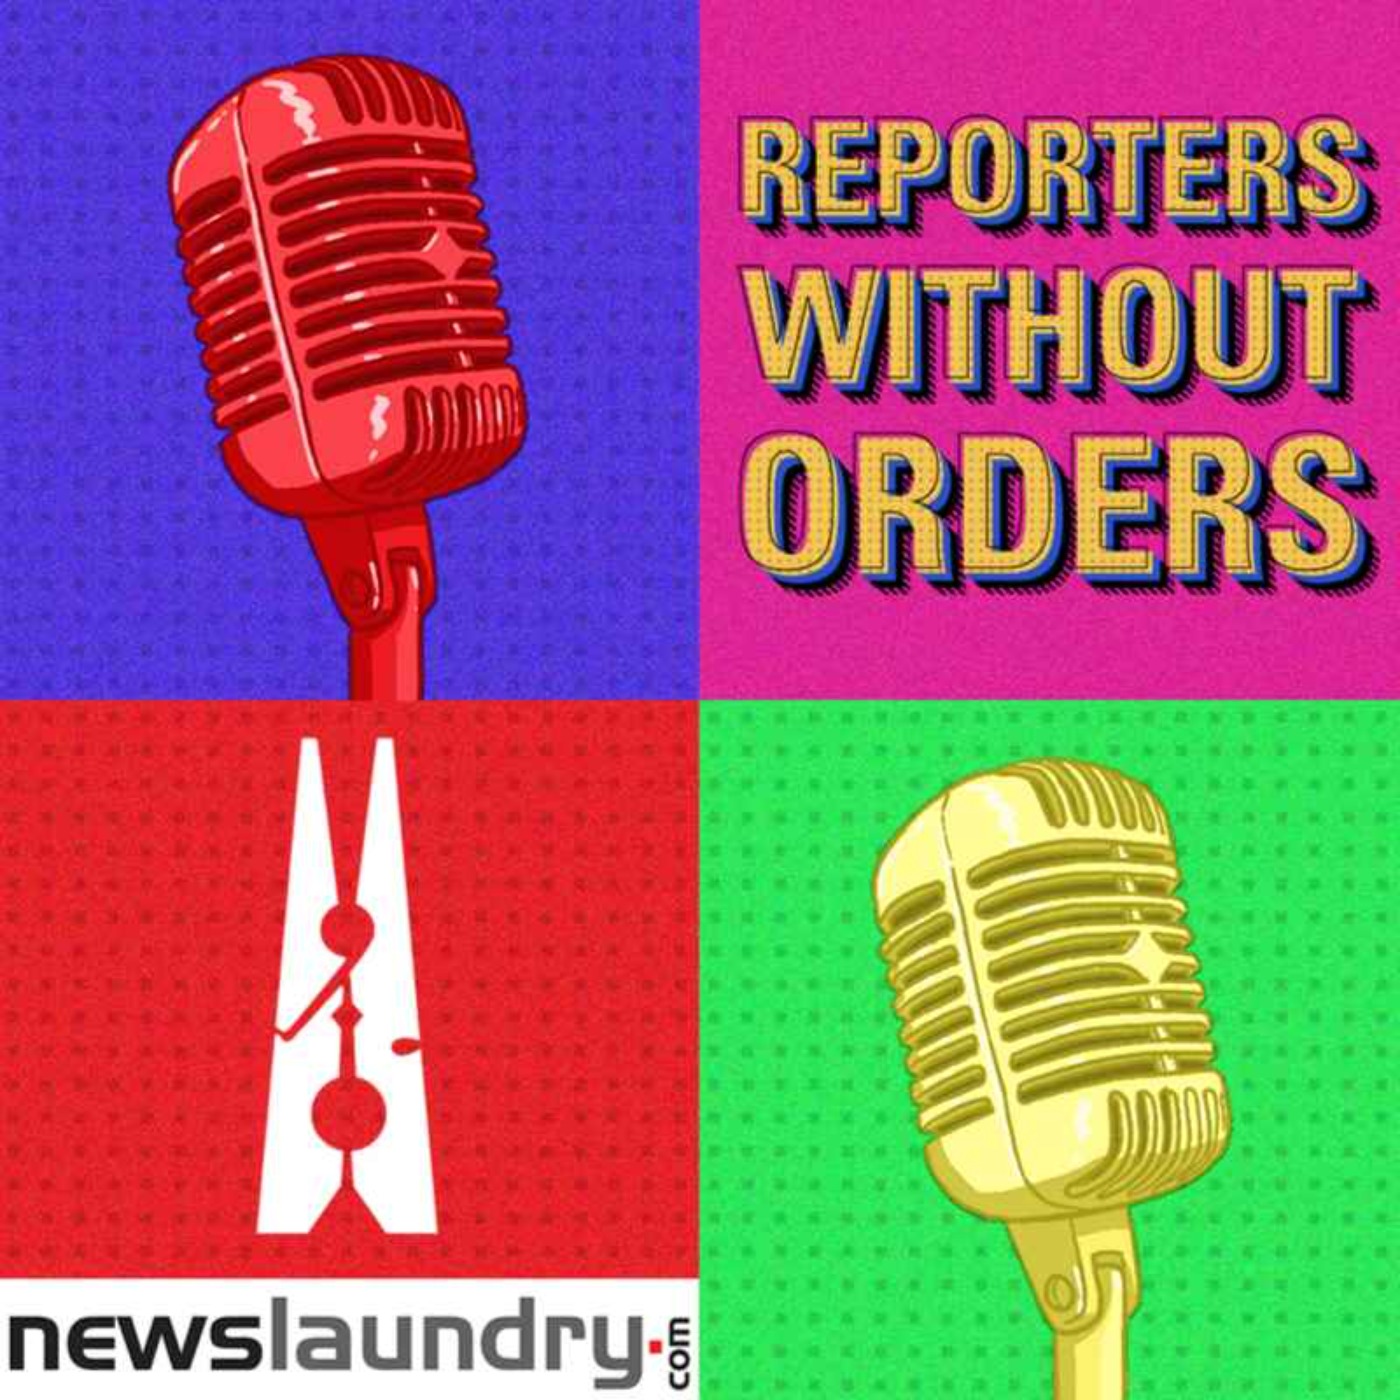 Reporters Without Orders Ep 156: Dainik Jagran’s PR campaign for UP and Disha Ravi’s bail